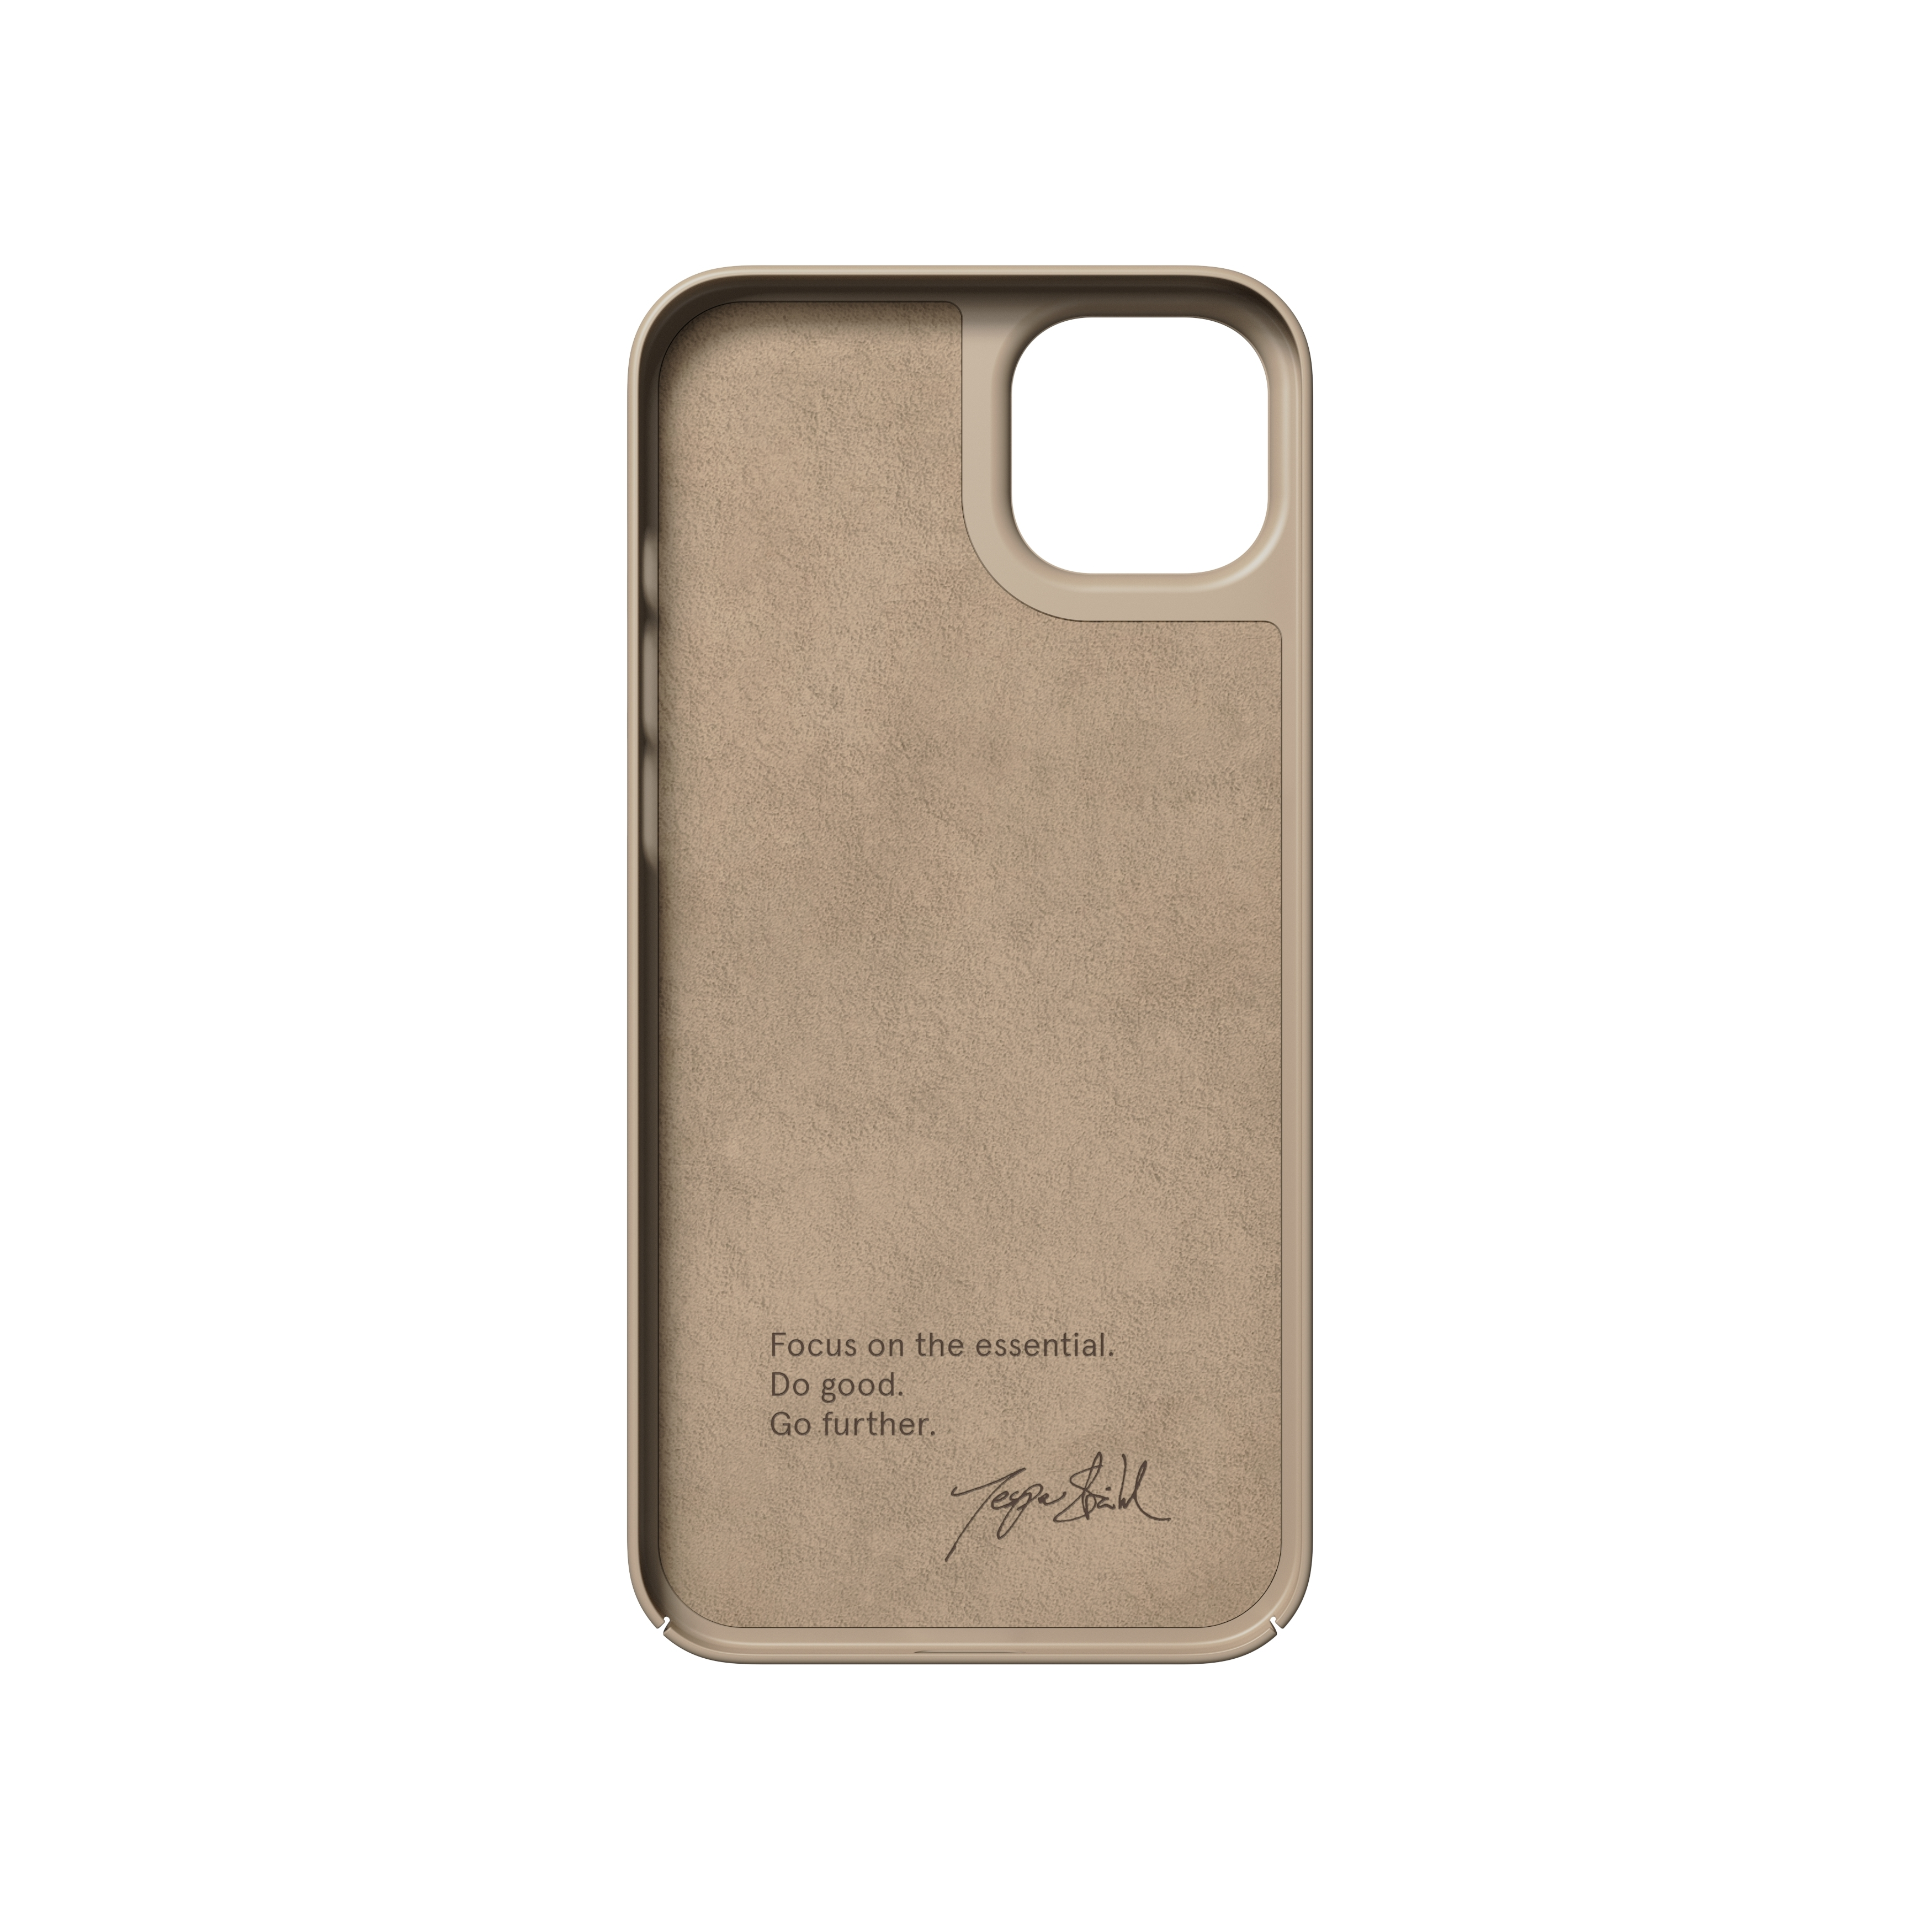 Thin, 14 PLUS, Backcover, SAND IPHONE NUDIENT APPLE,